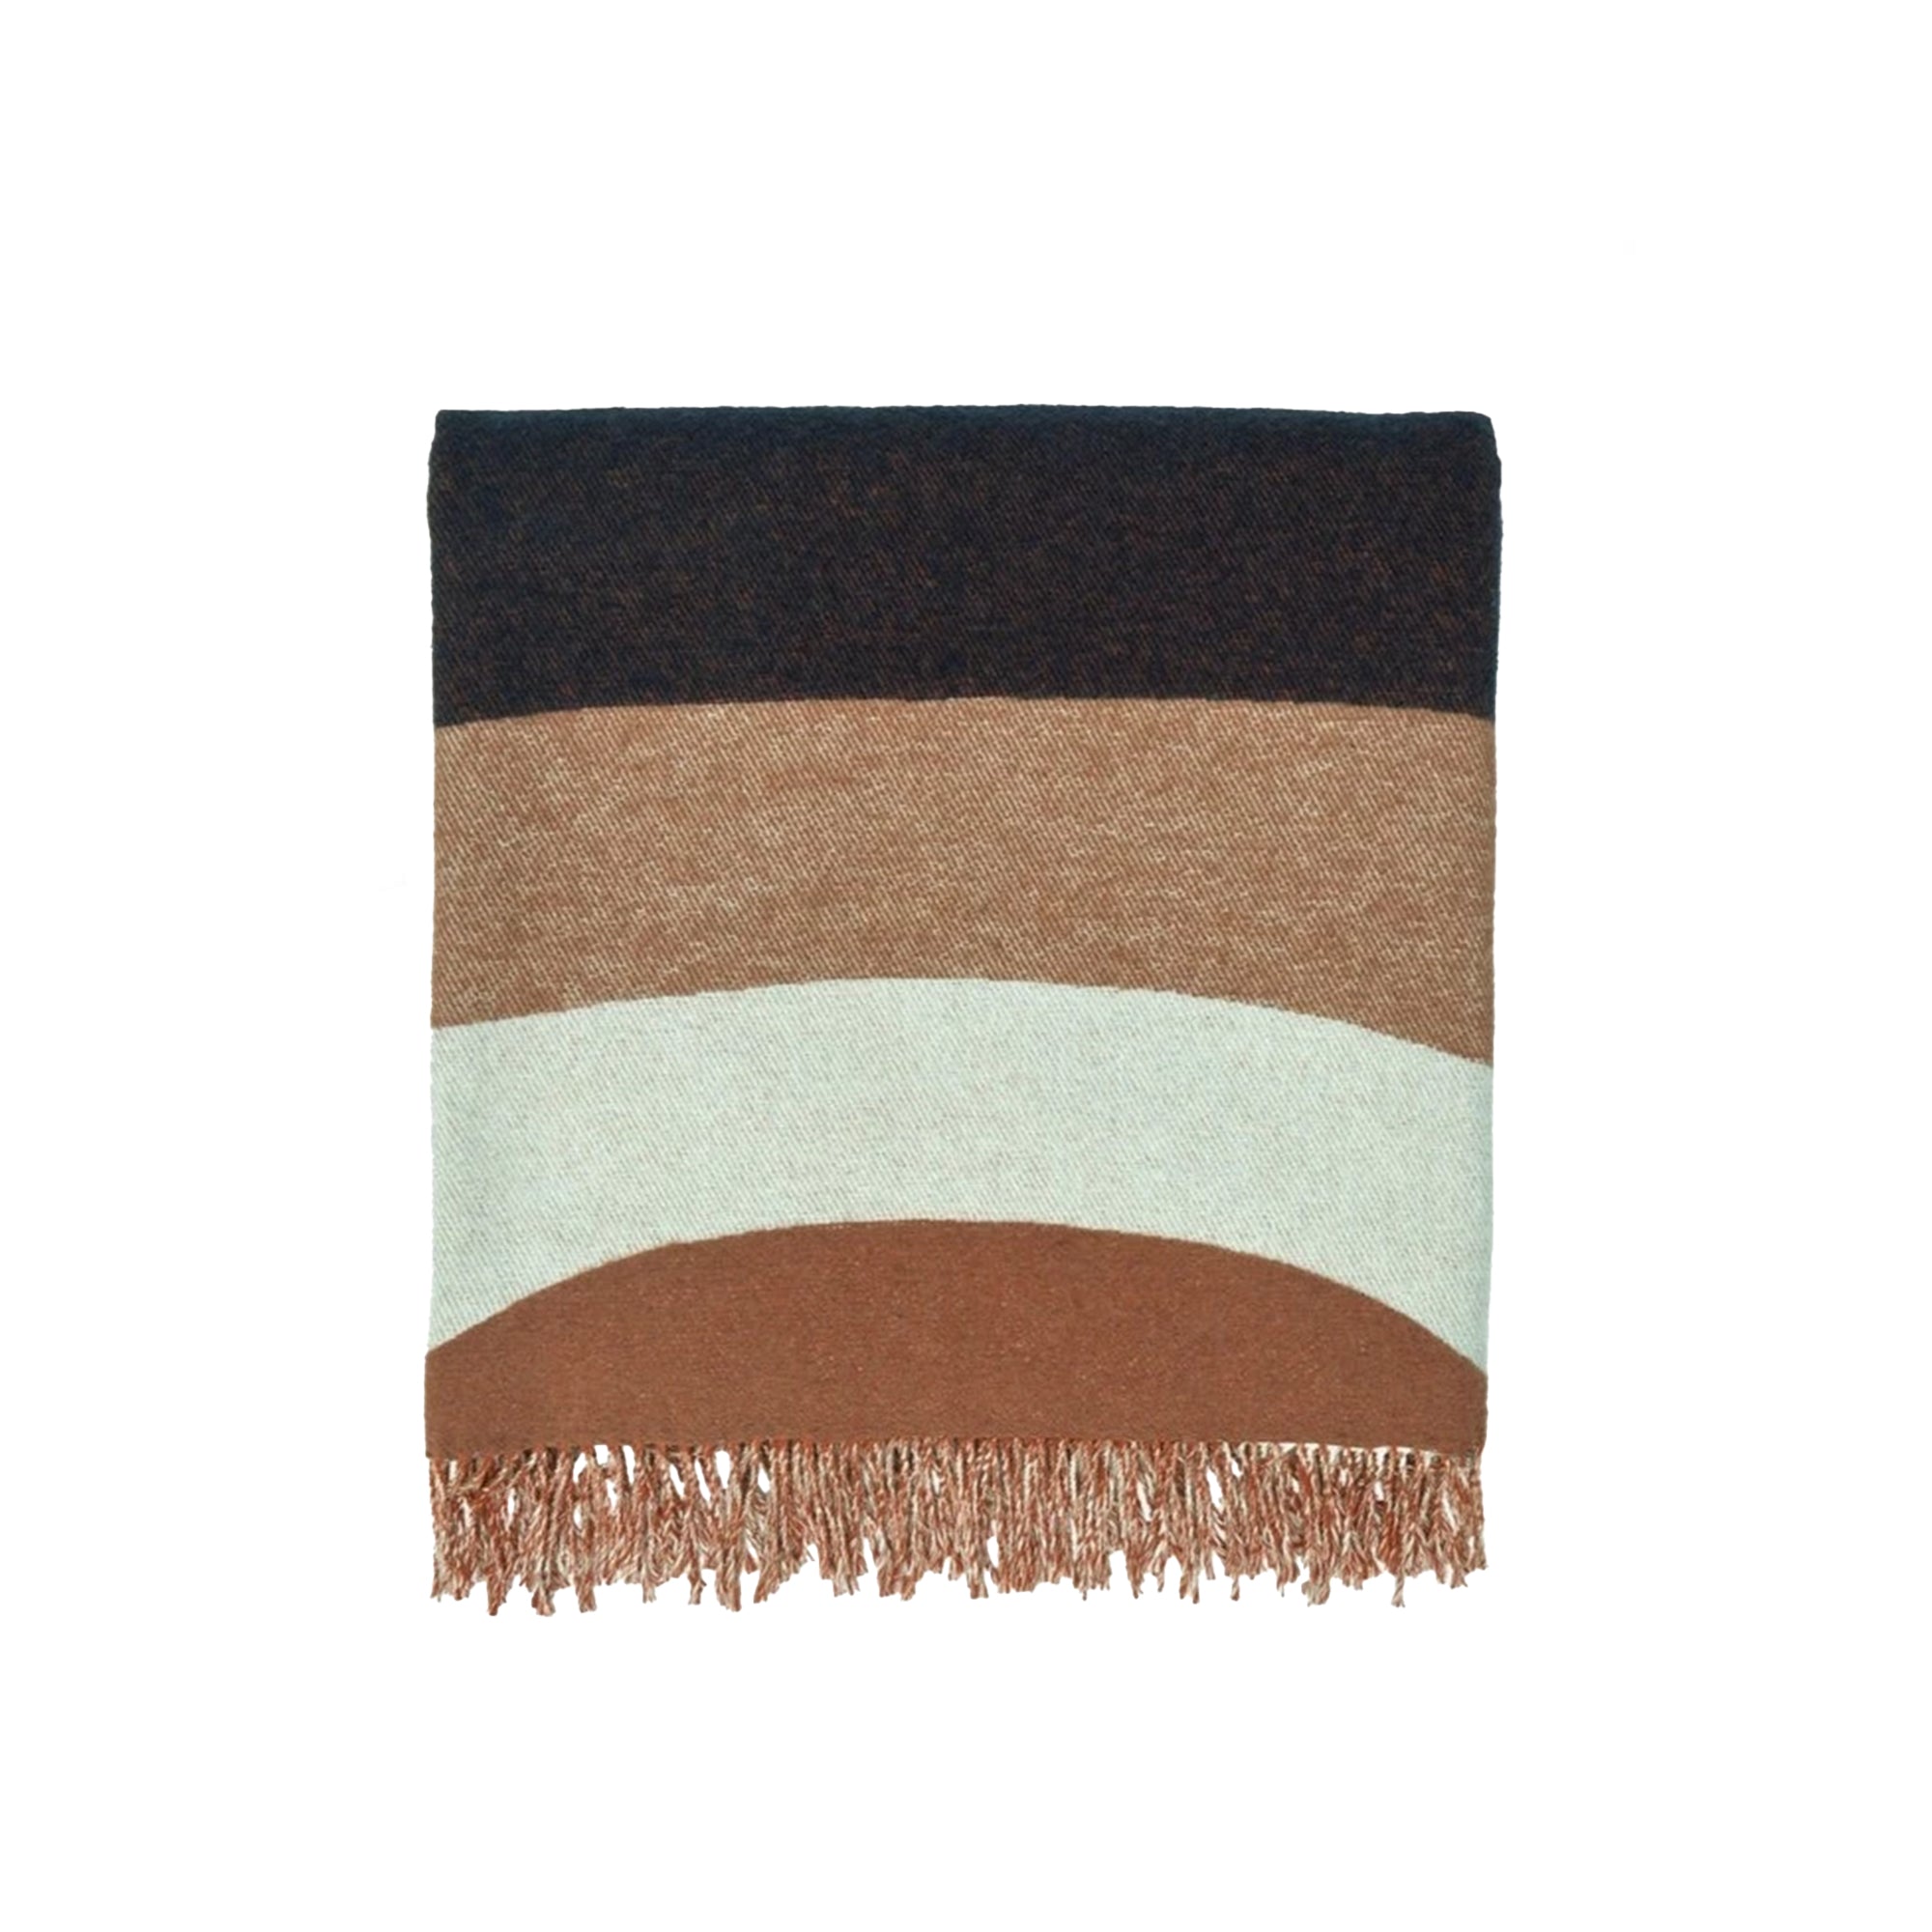 Melooni Throw Blanket